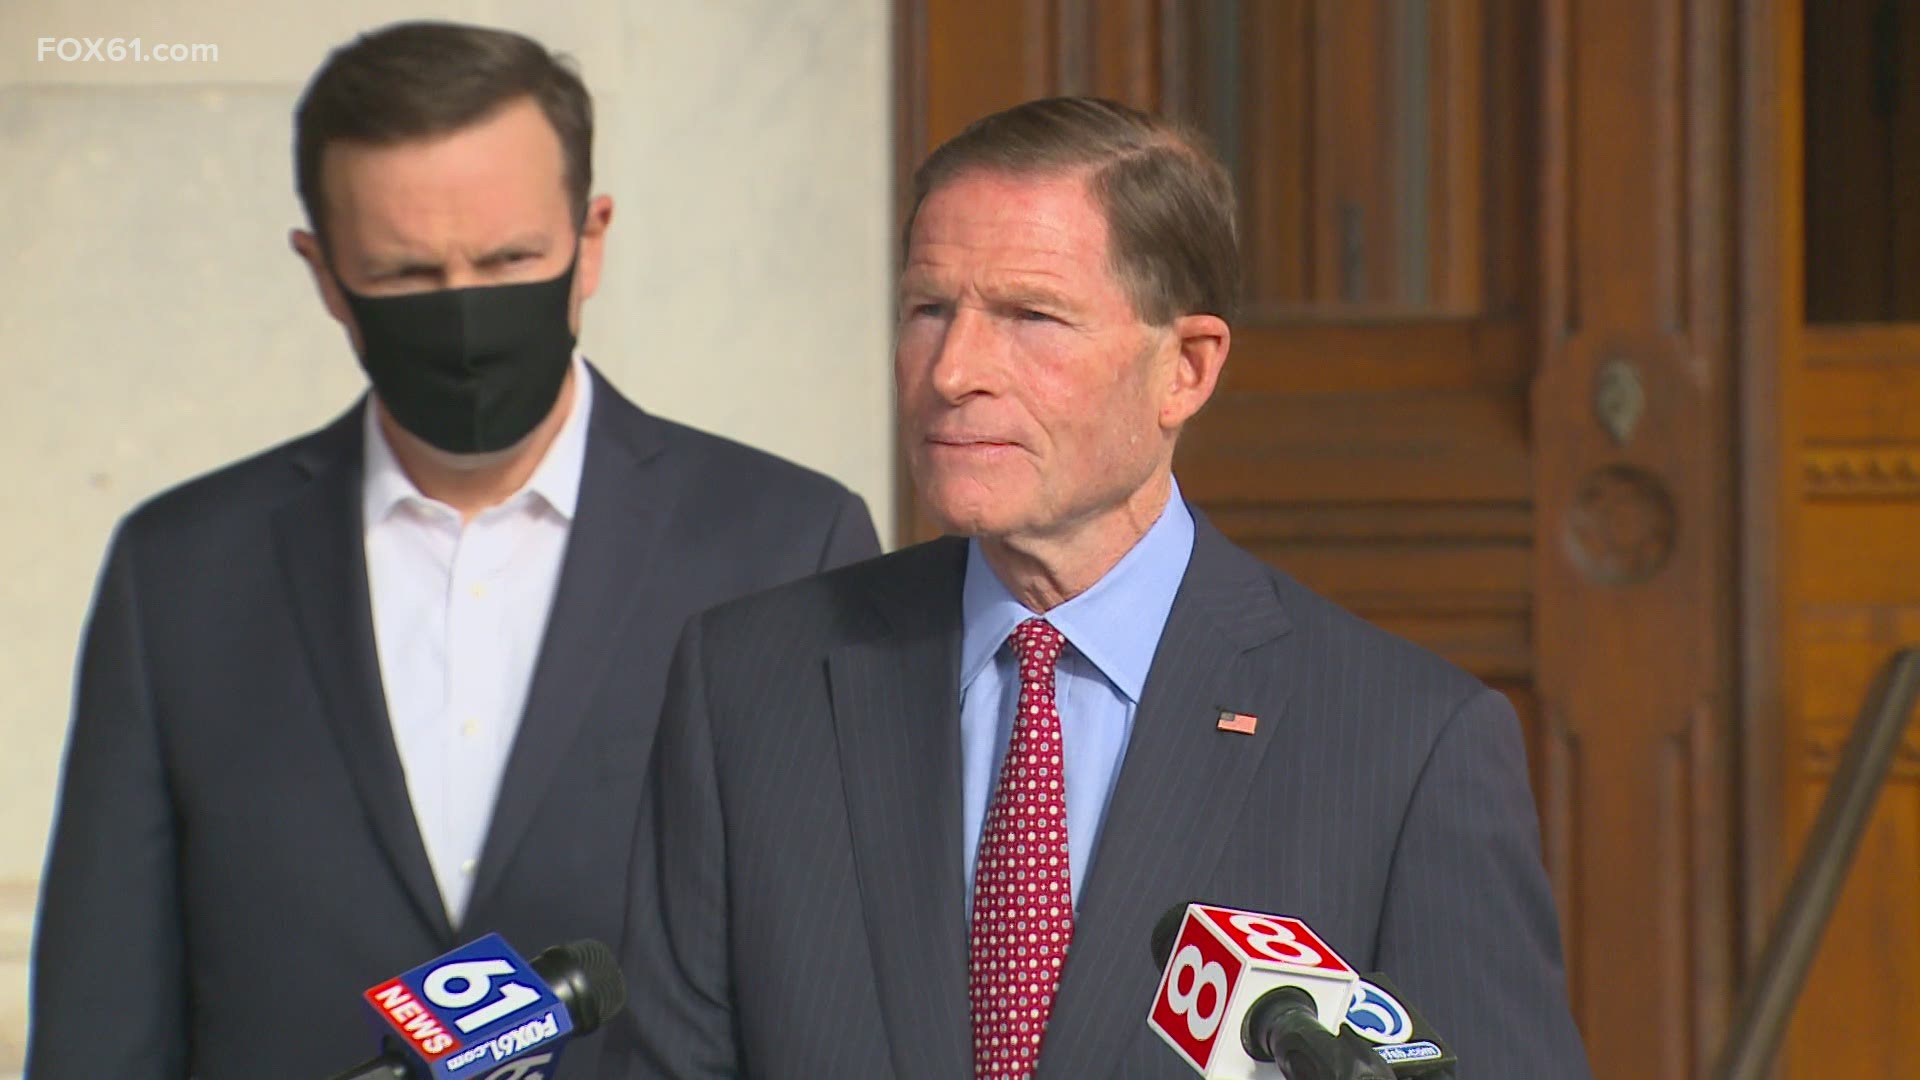 Senators Murphy and Blumenthal painted a picture of a dark winter for people and businesses in Connecticut if relief isn’t passed.